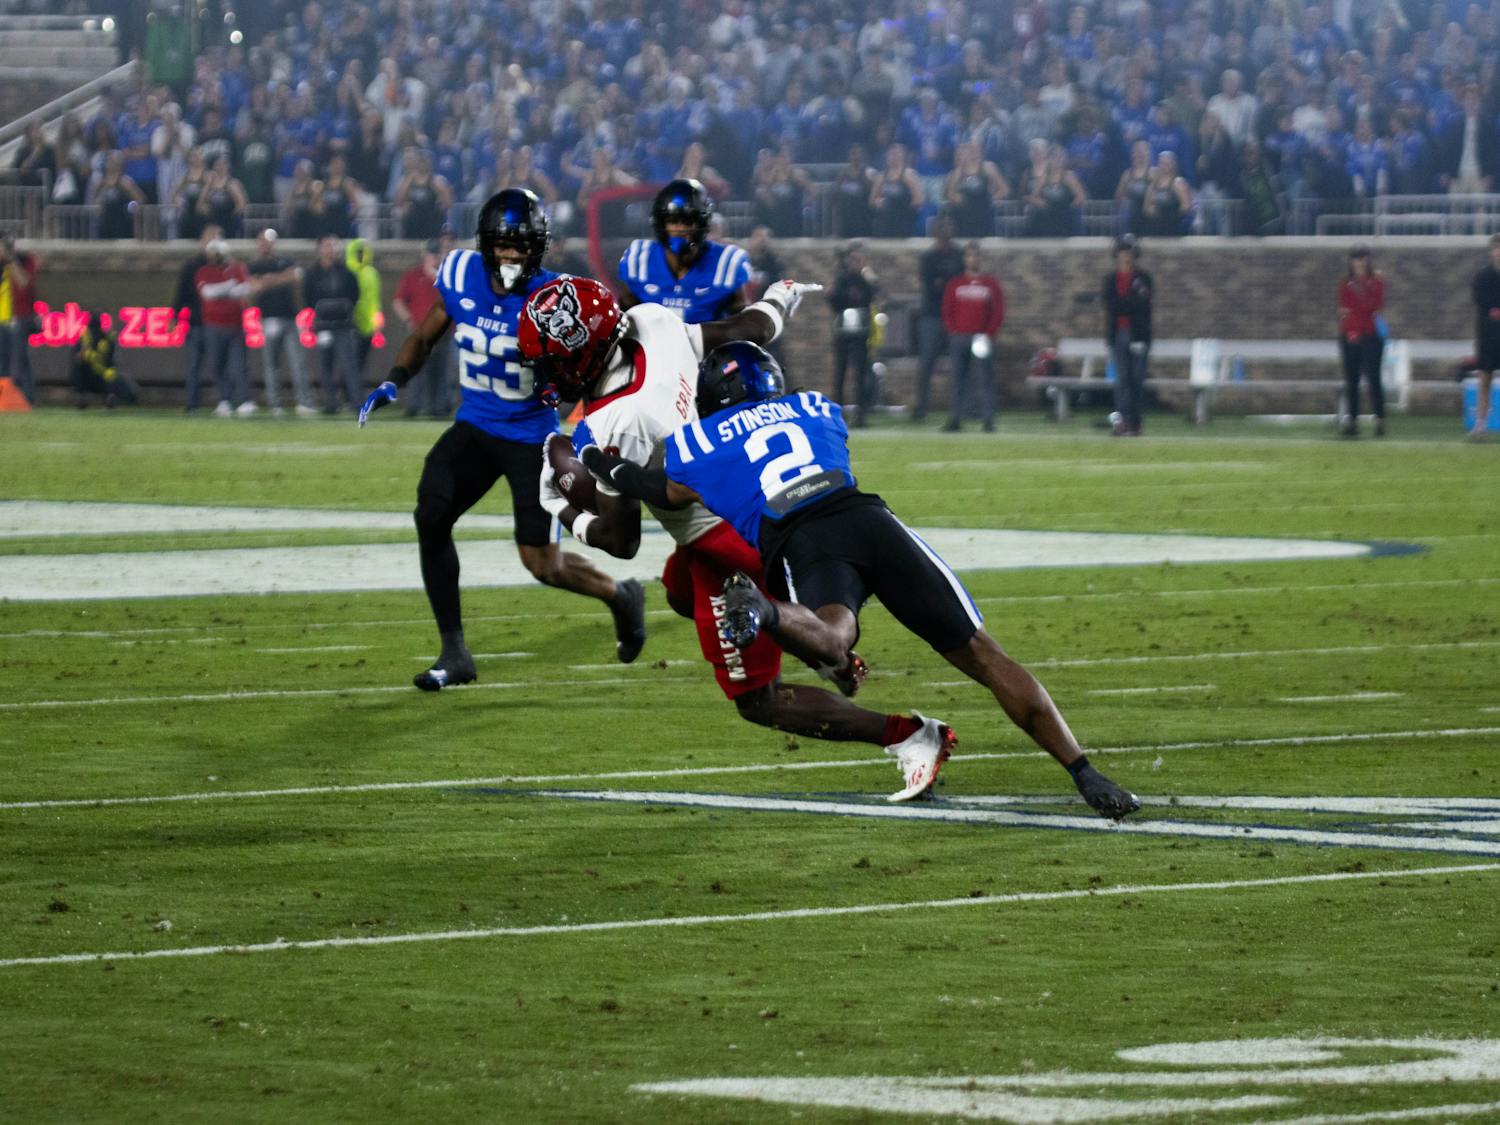 Defense will be key in No. 20 Duke football's matchup with No. 18 Louisville.